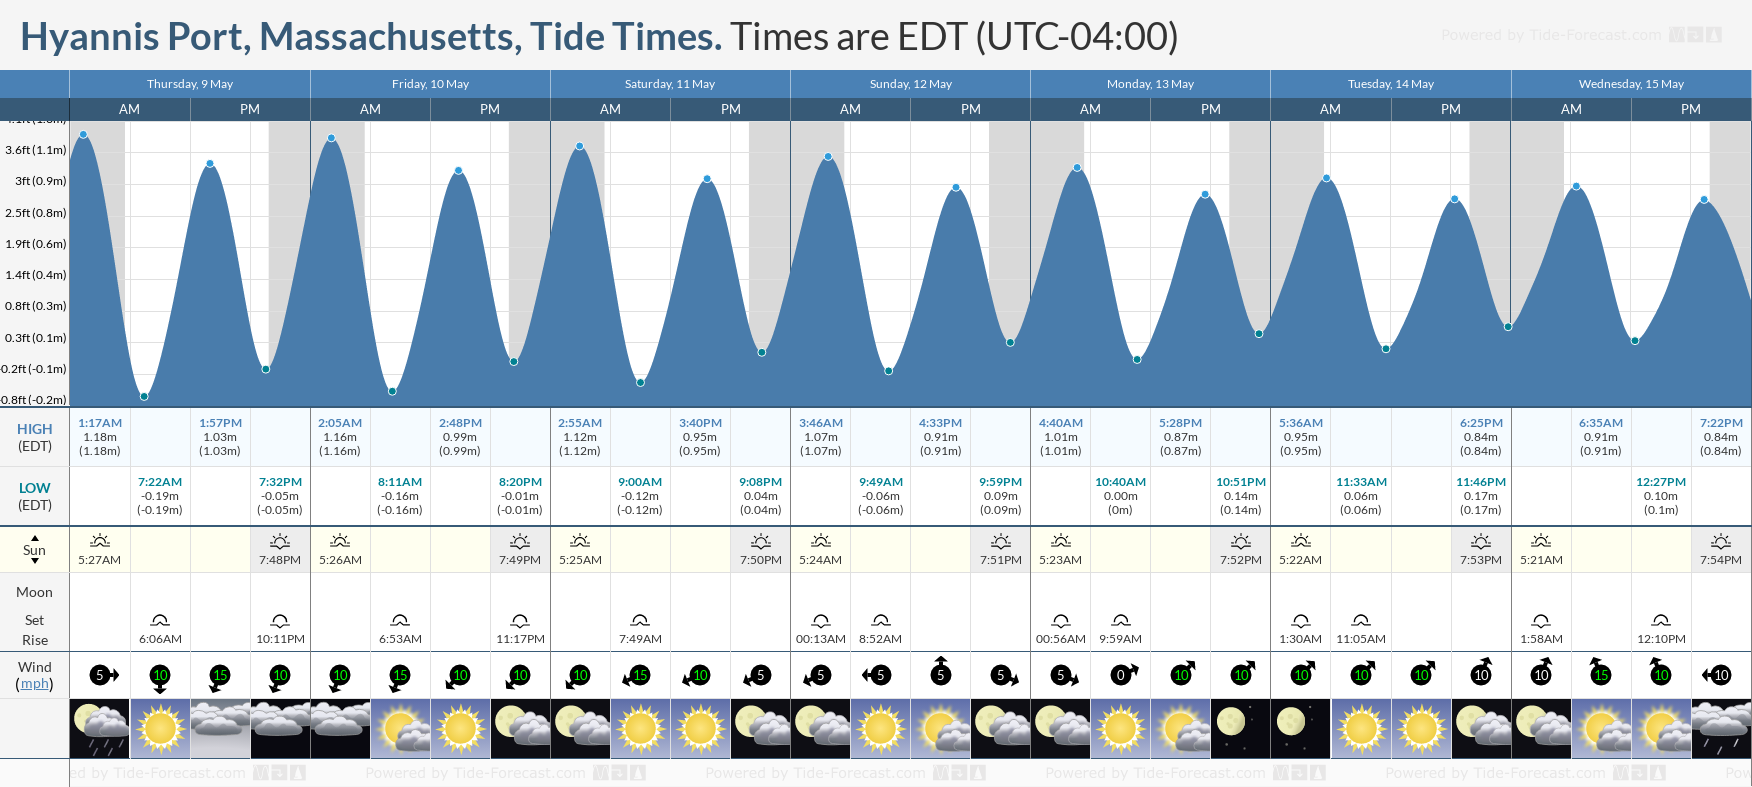 Hyannis Port, Massachusetts Tide Chart including high and low tide tide times for the next 7 days